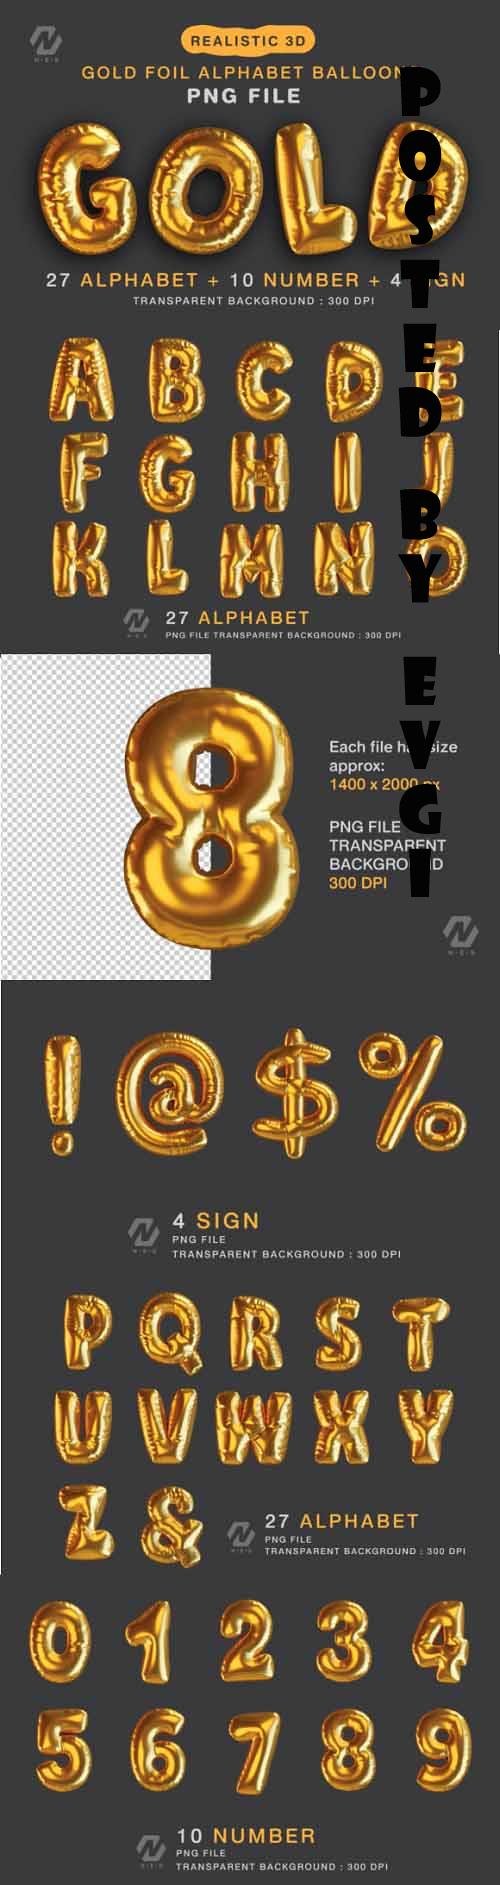 Gold Foil Alphabet Balloon Realistic PNG